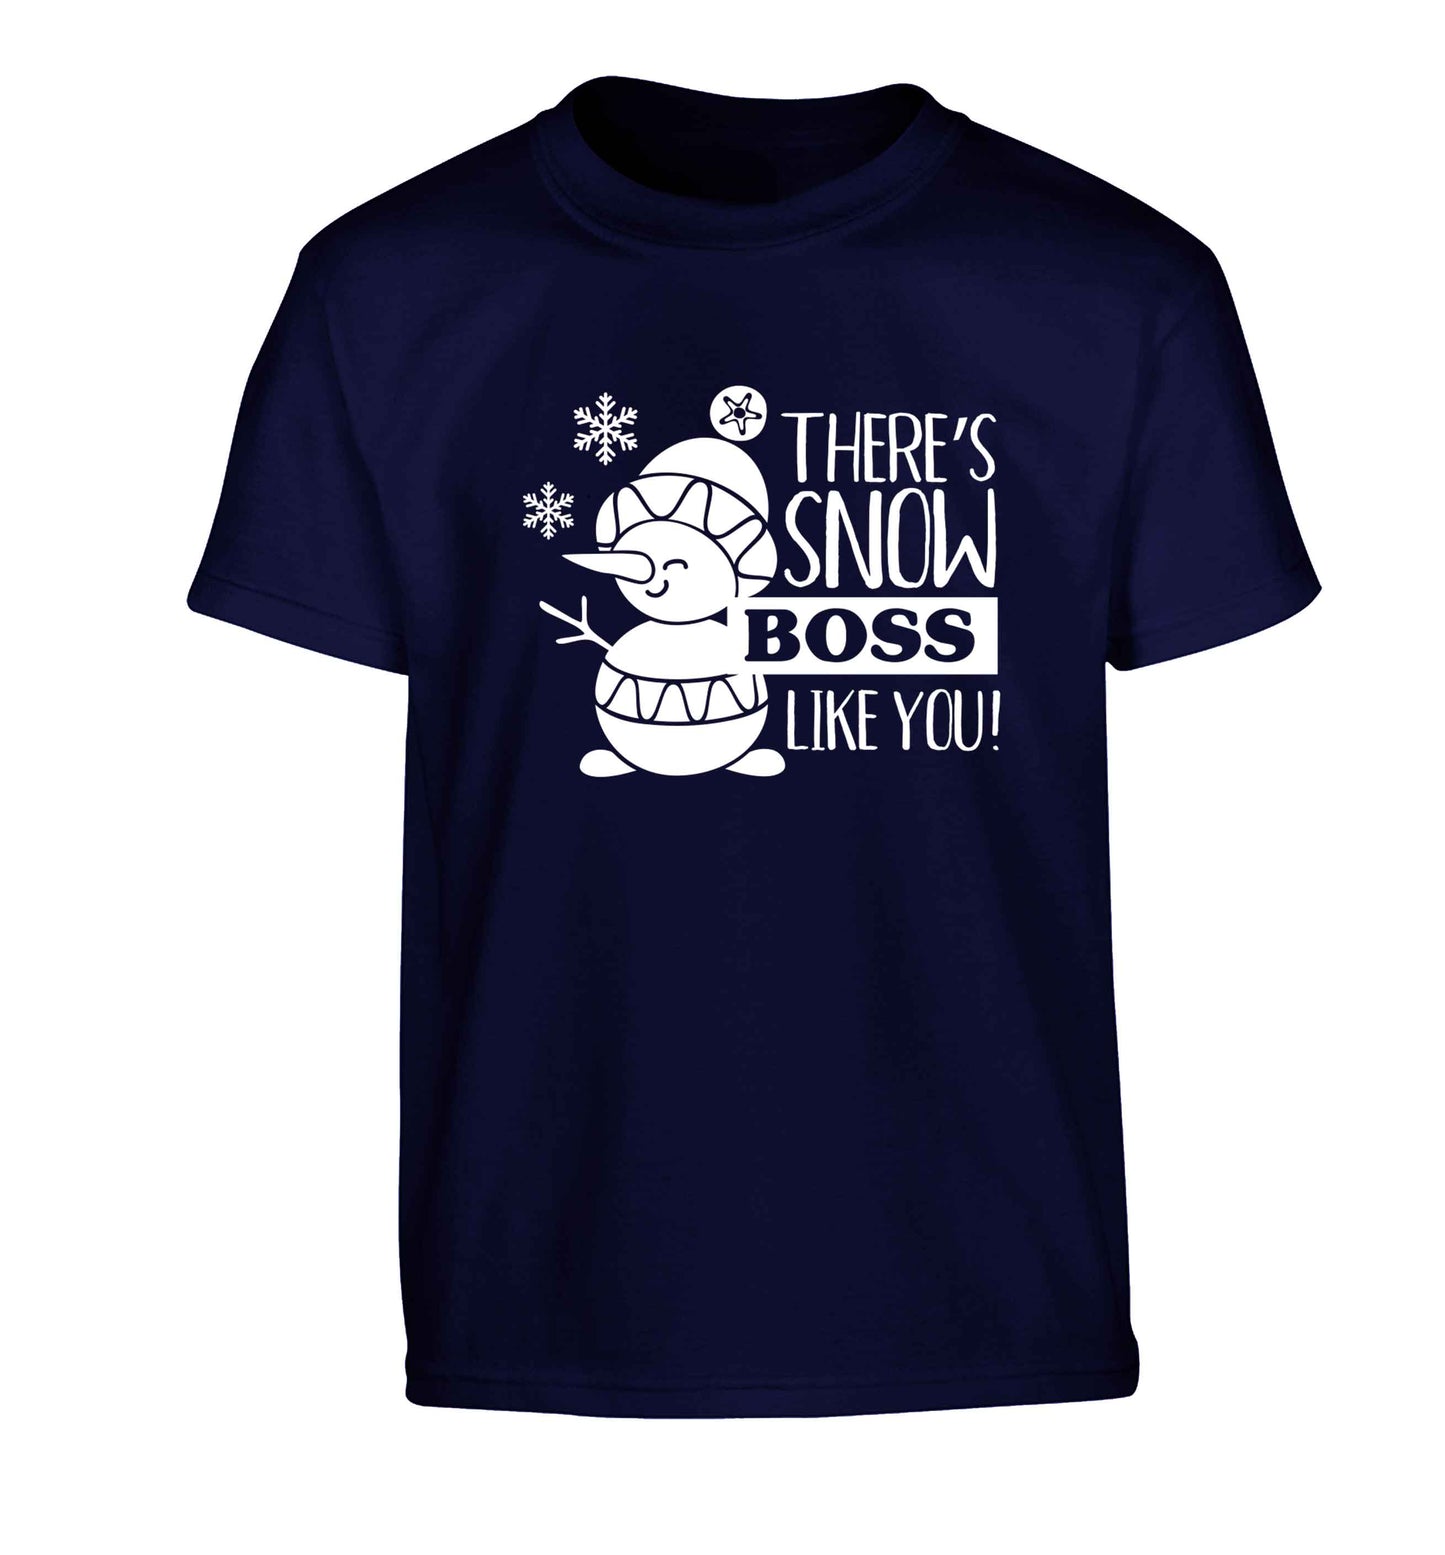 There's snow boss like you Children's navy Tshirt 12-13 Years